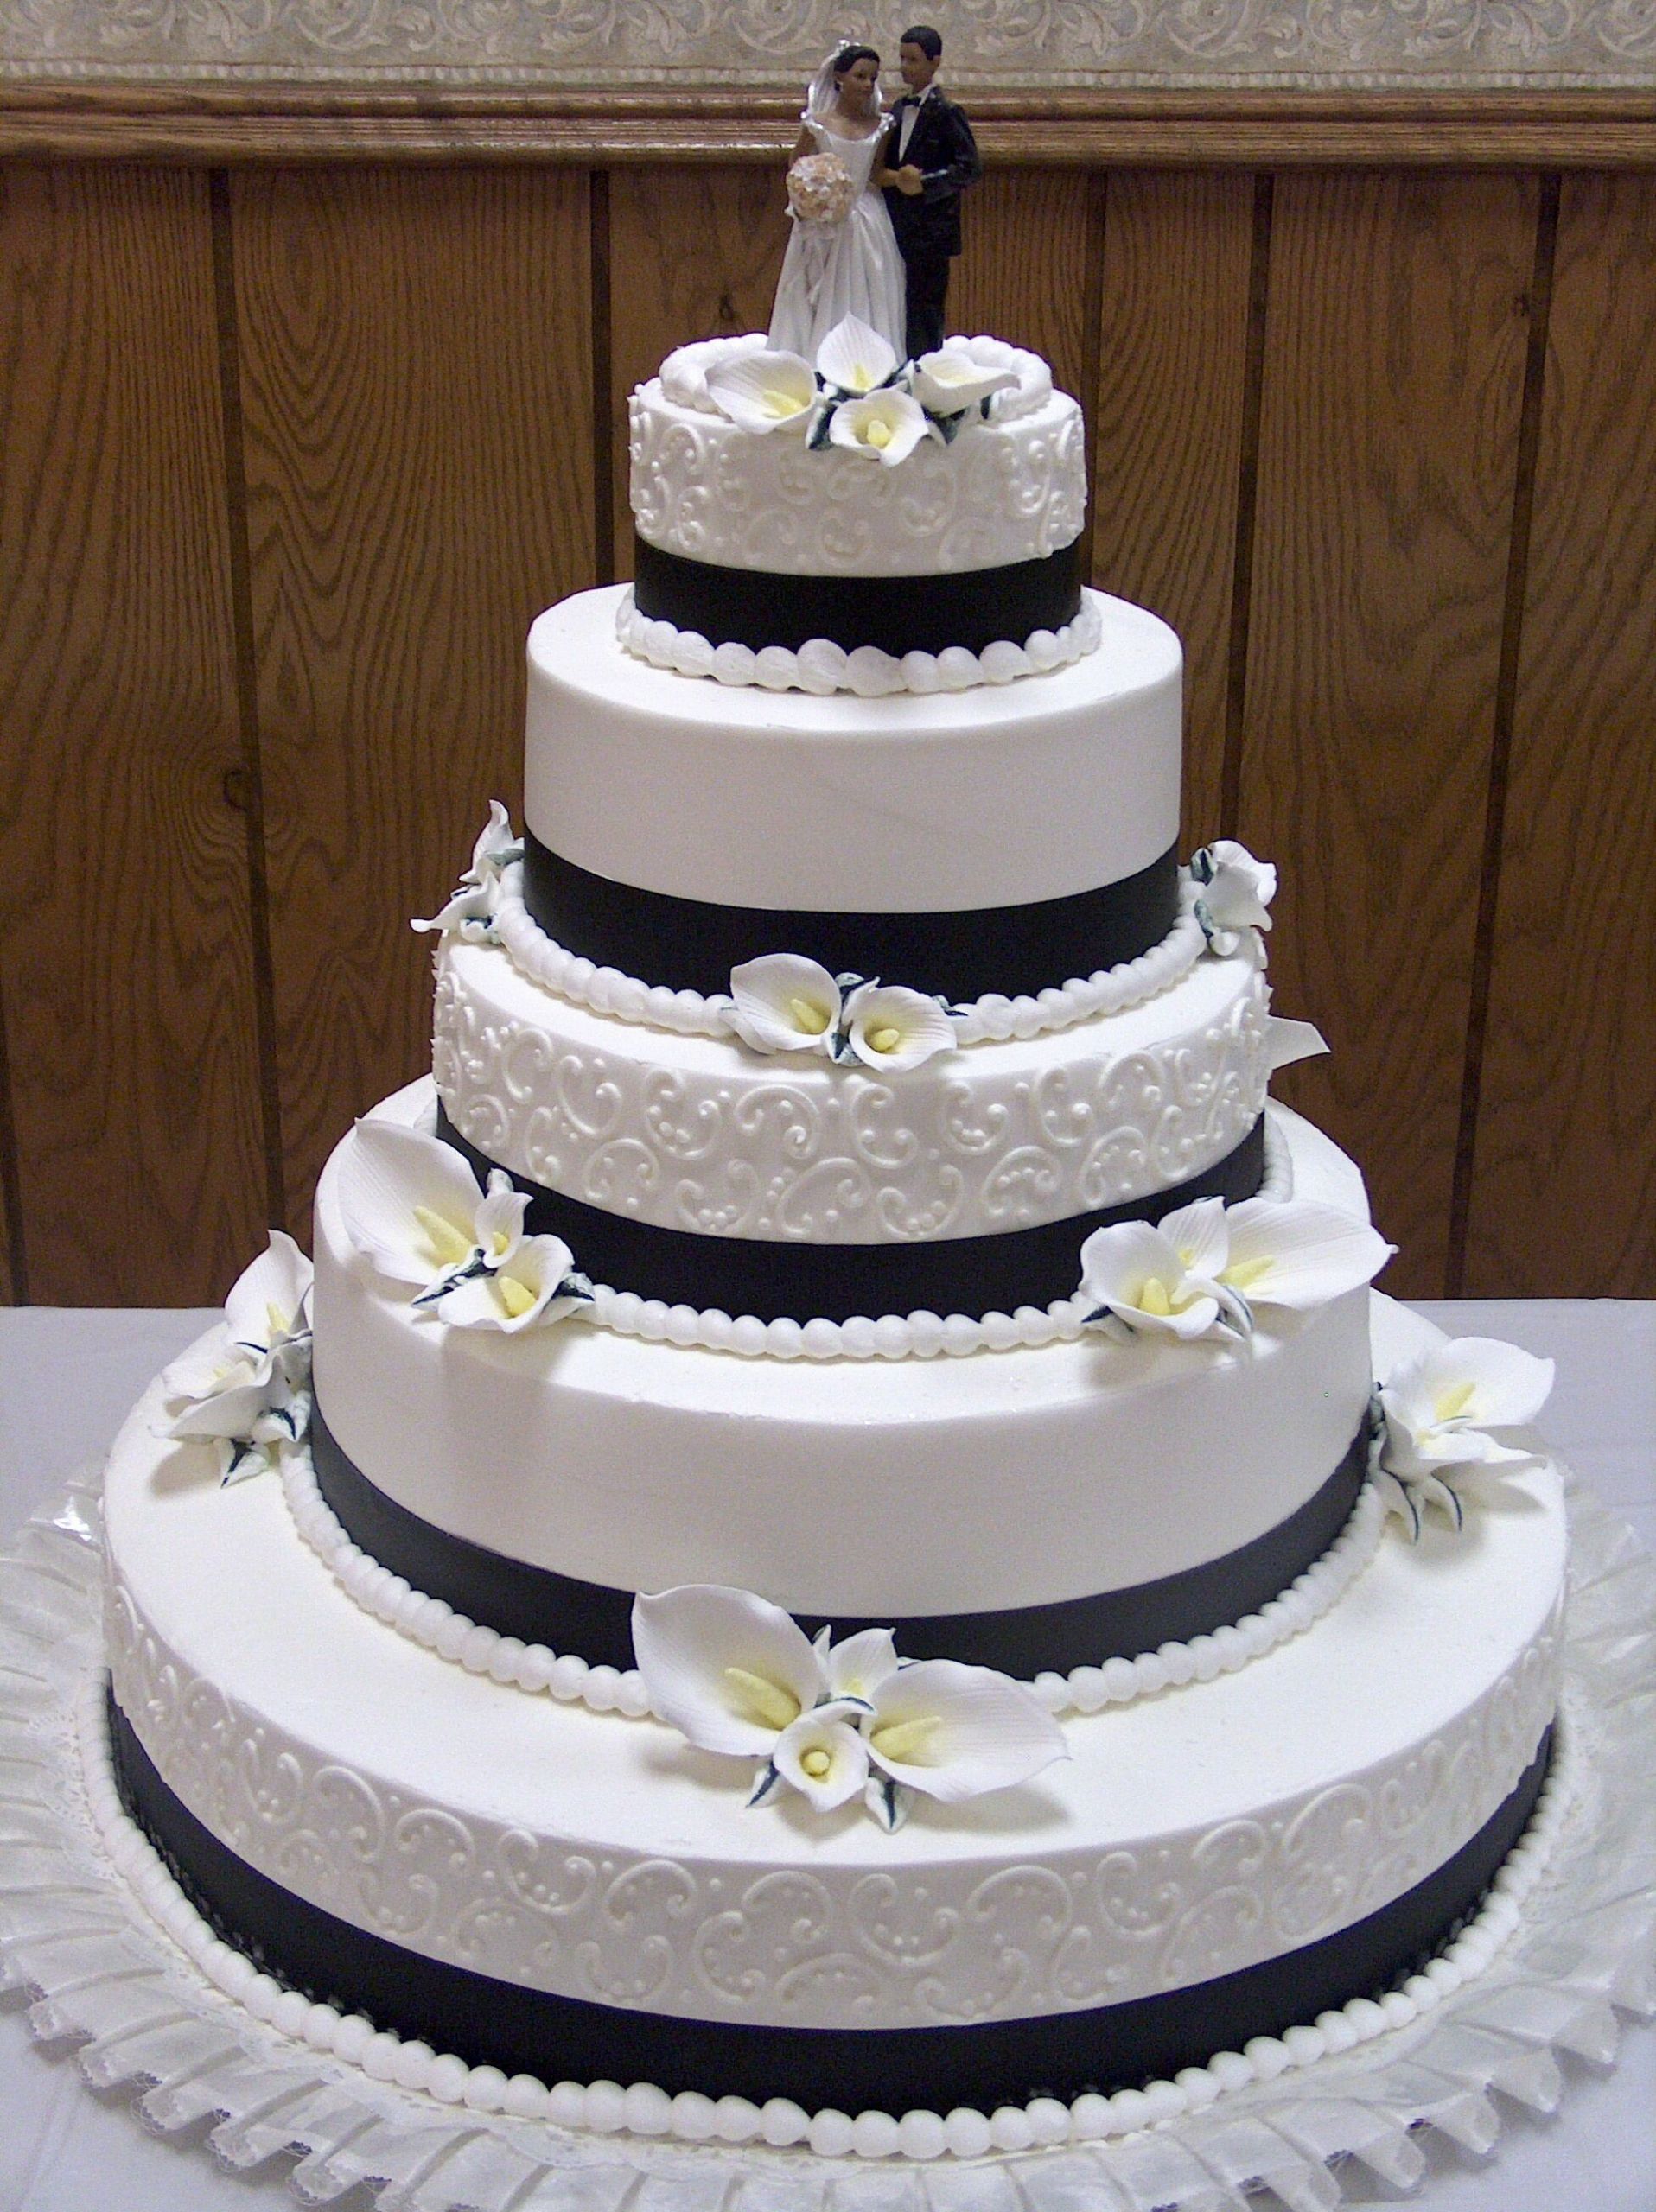 Wedding Cakes Images
 Moio s Italian Pastry Shop